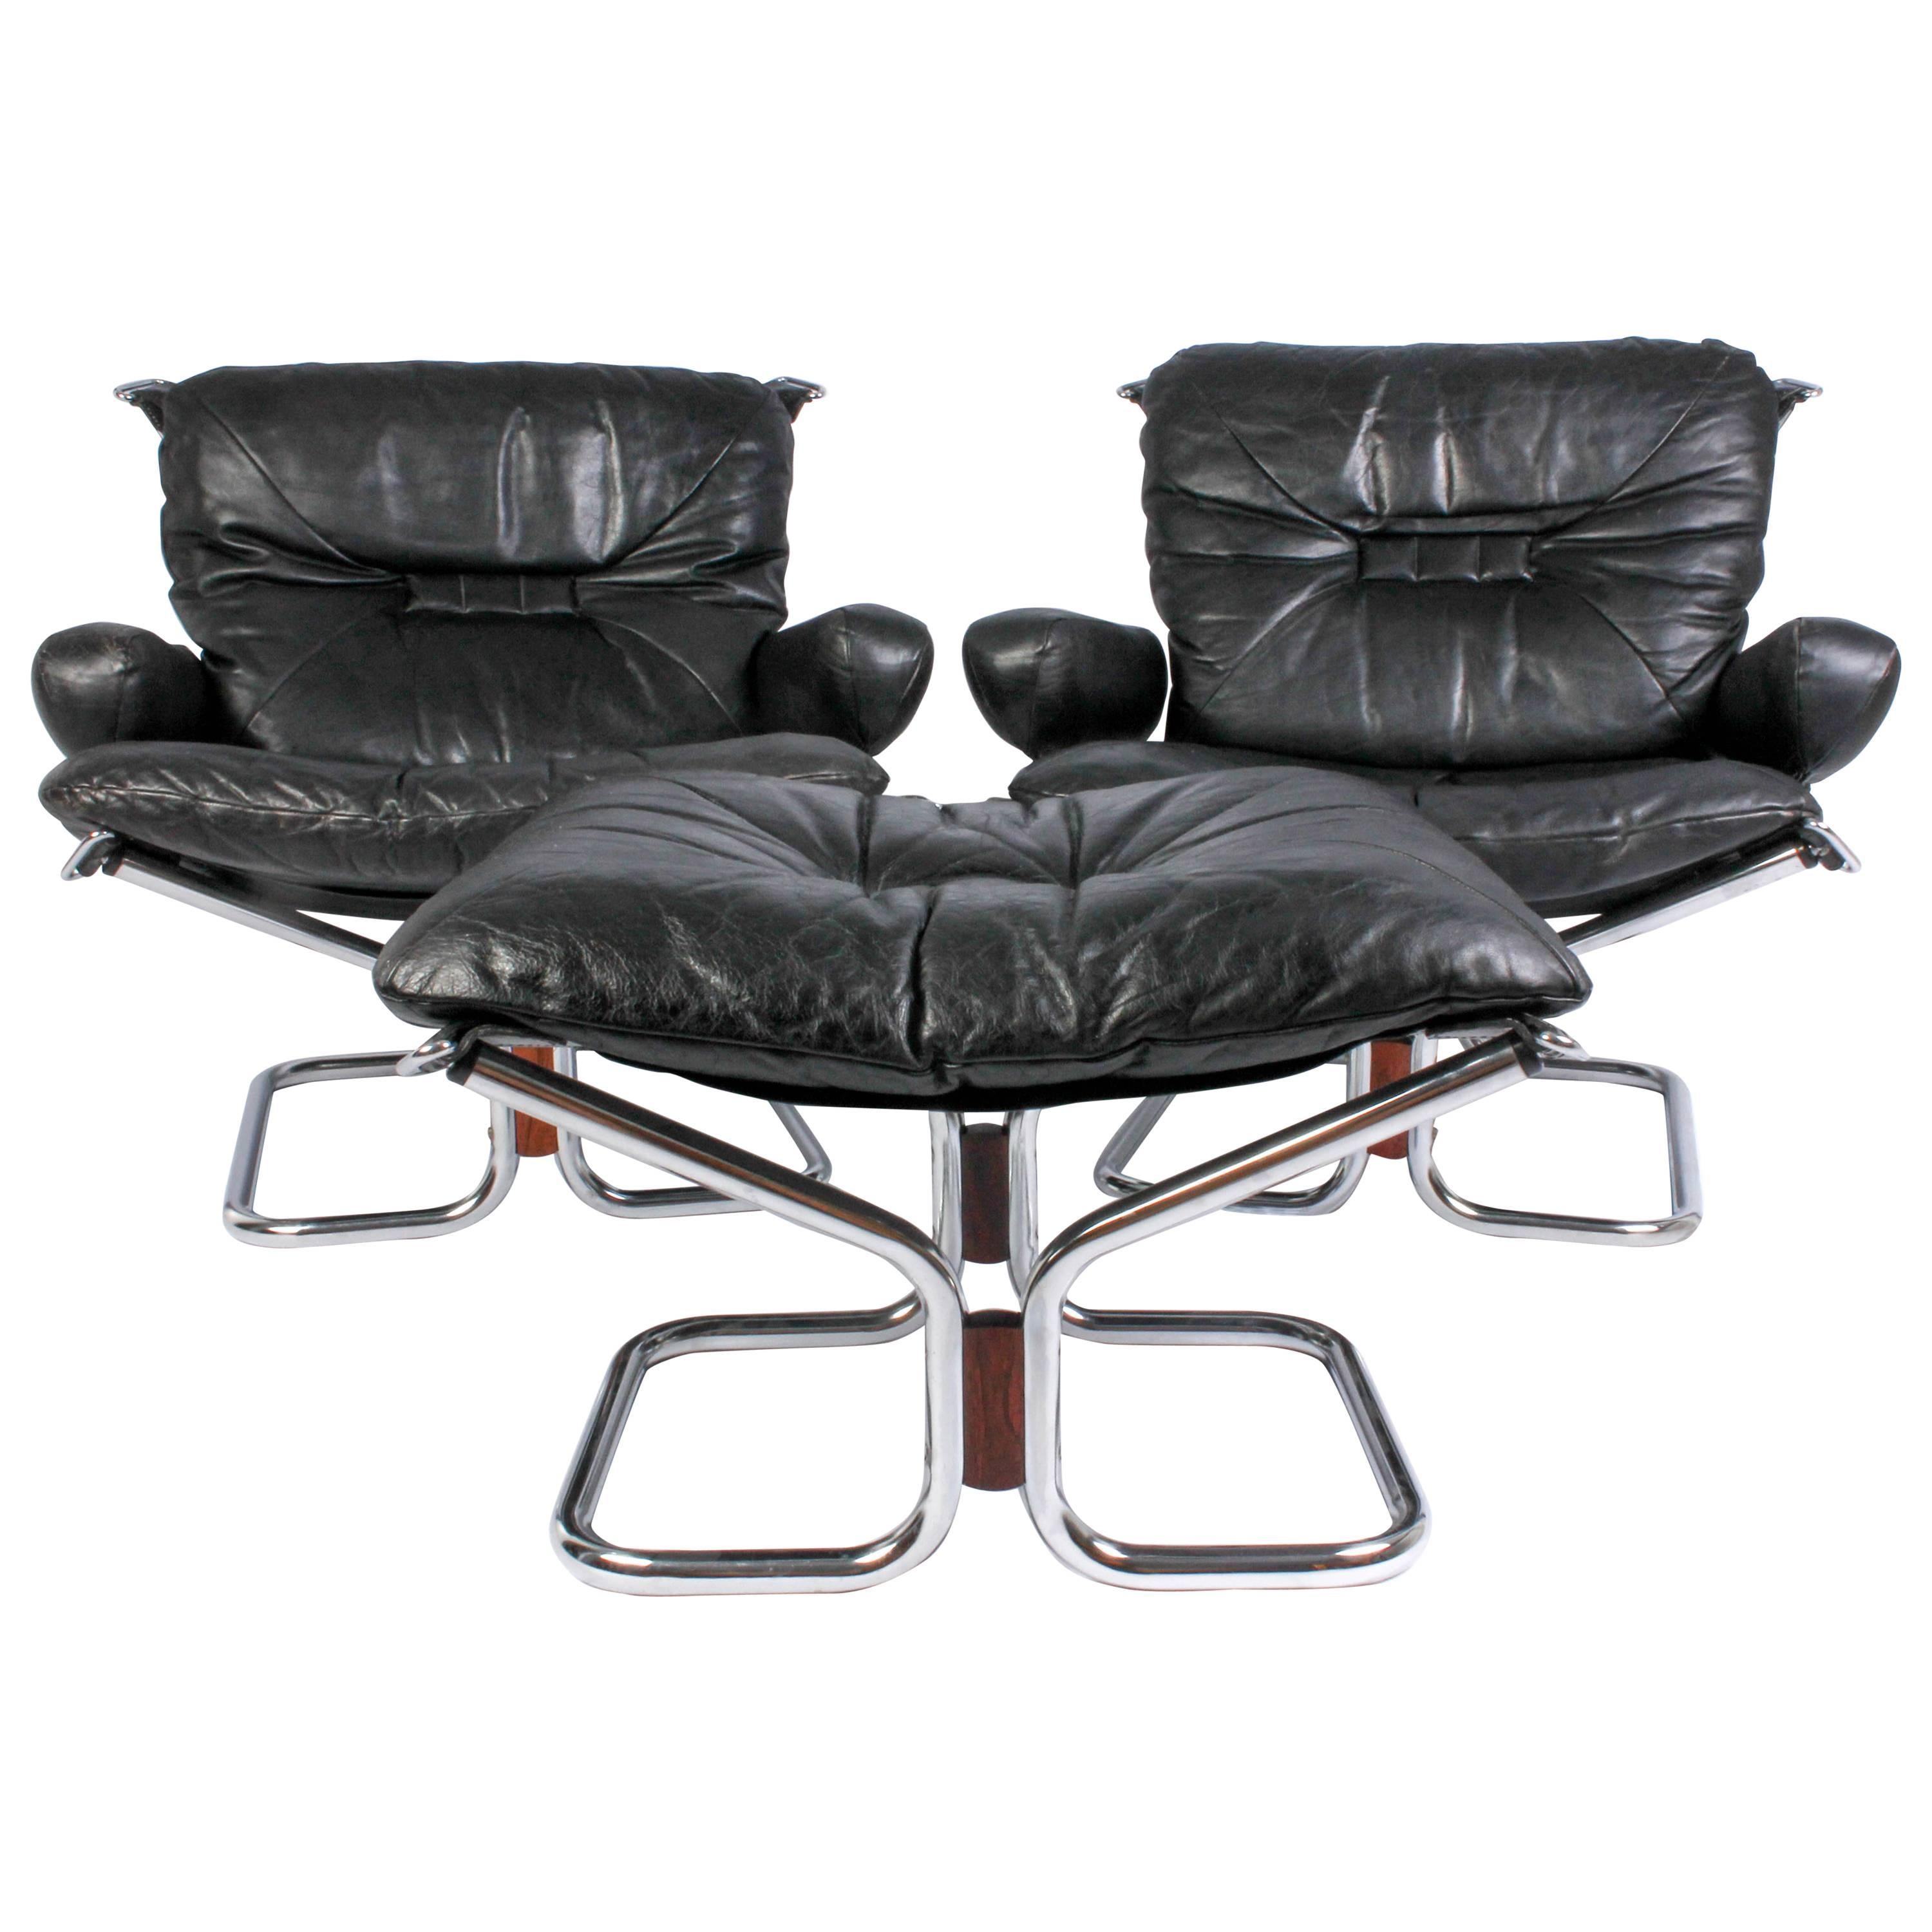 Pair of Midcentury Leather & Chrome Lounge Chairs and Ottoman by Ingmar Relling